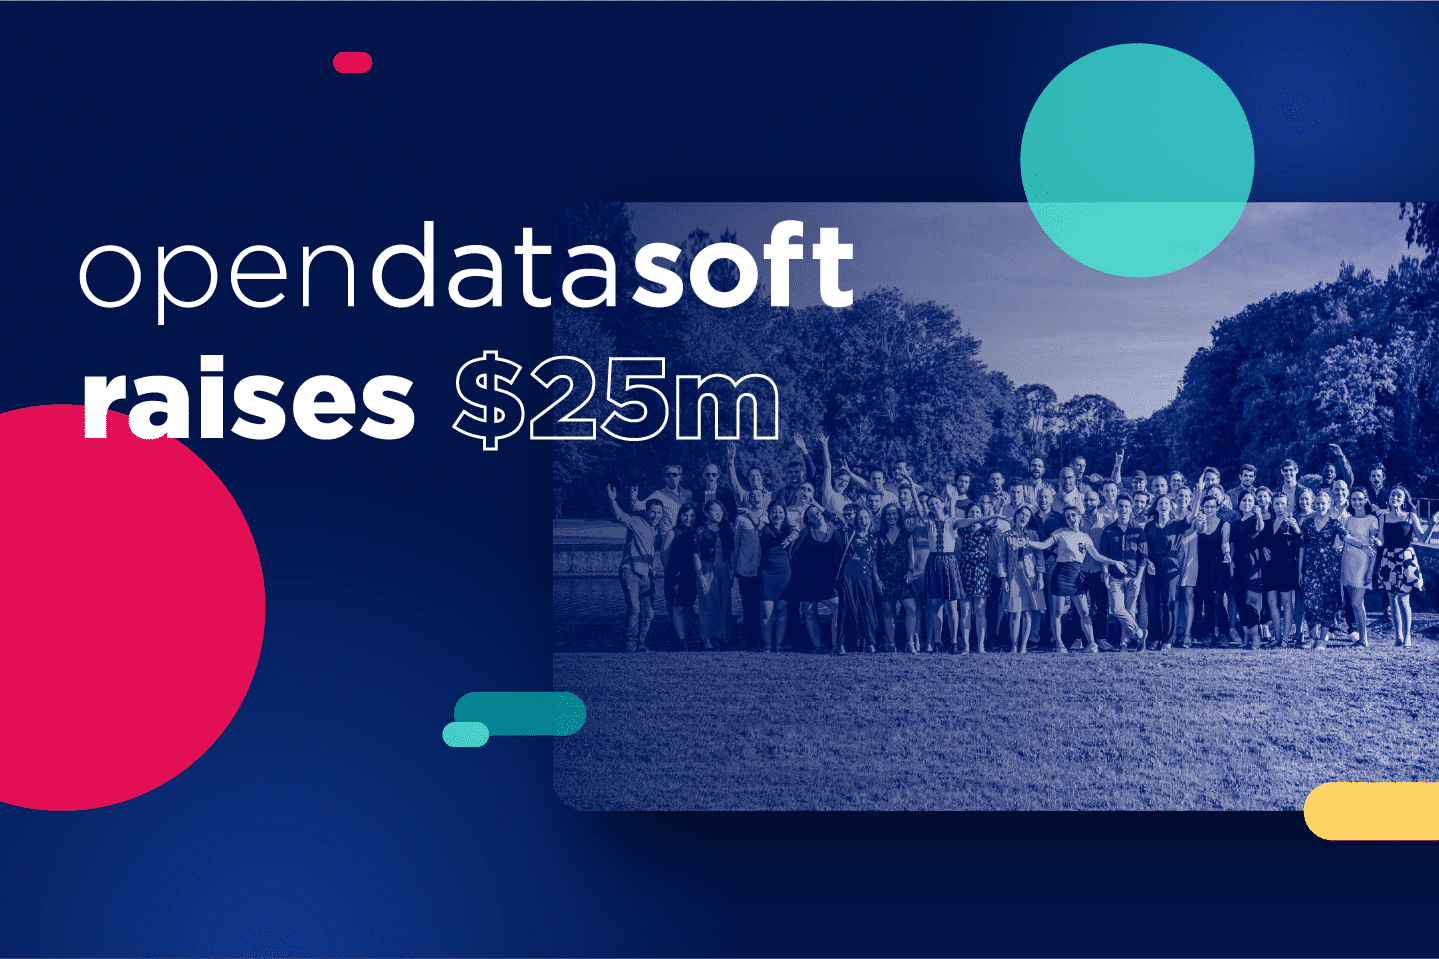 Opendatasoft raises $25m to increase and expand data access across the world.